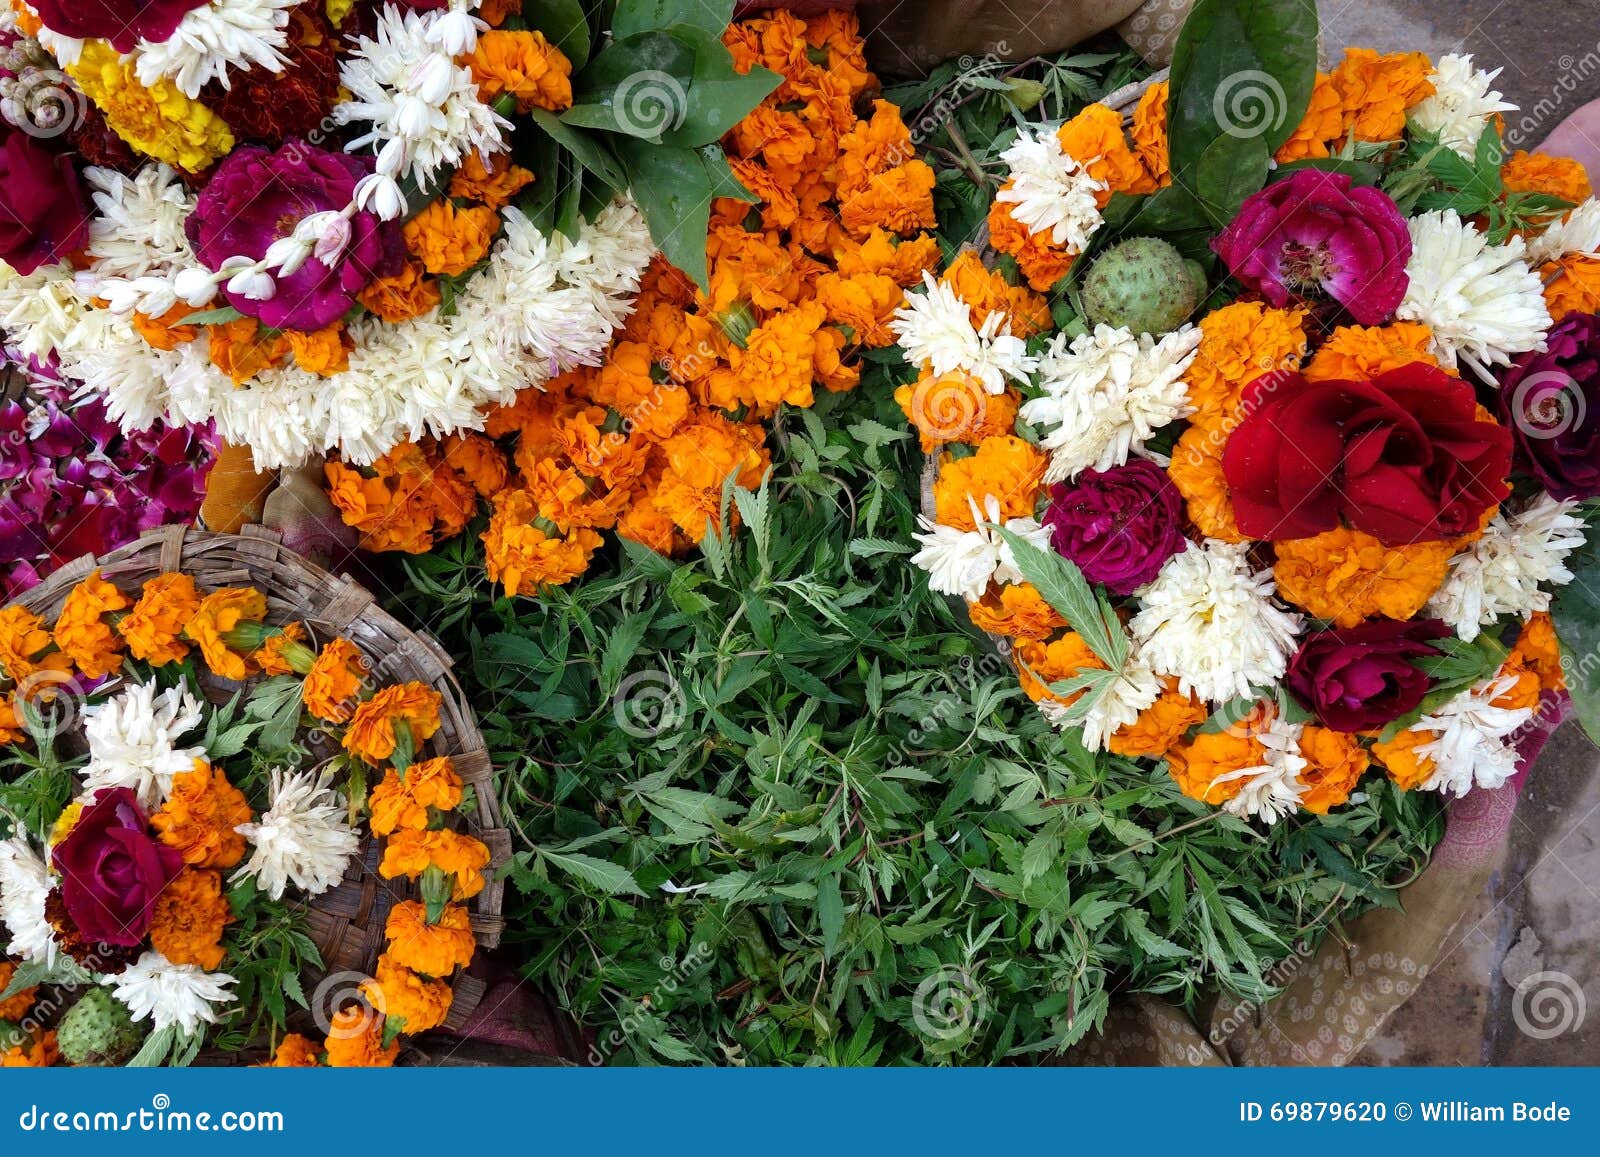 flower offerings to shiva shot being sold outside temple ayodhya north india pilgrims buy then offer 69879620